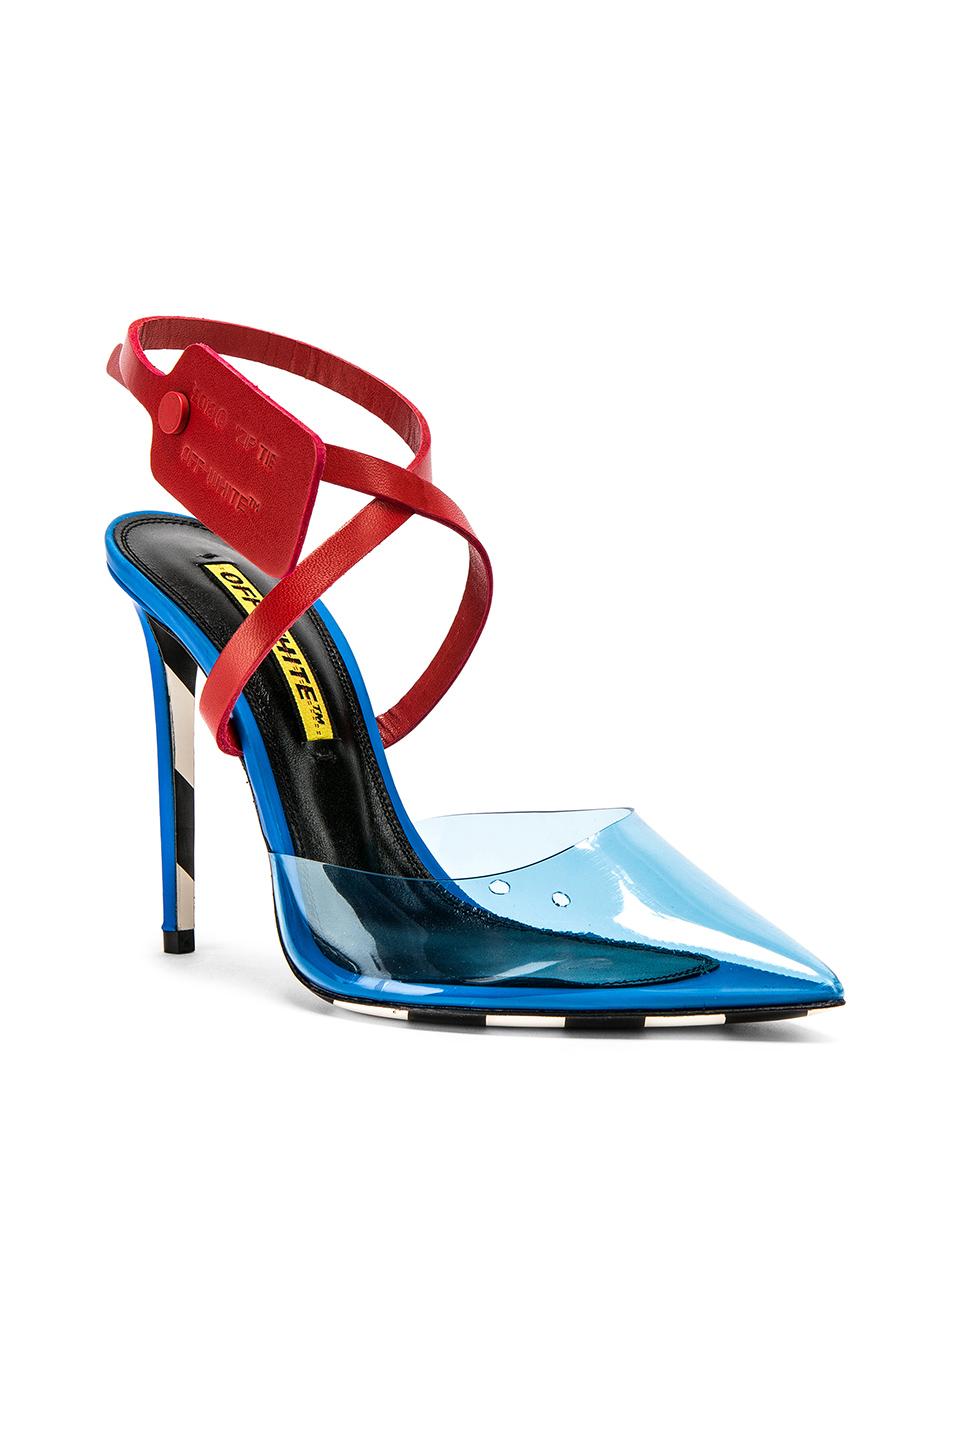 Off-White c/o Virgil Abloh Zip Tie Jelly Pumps in Blue - Lyst